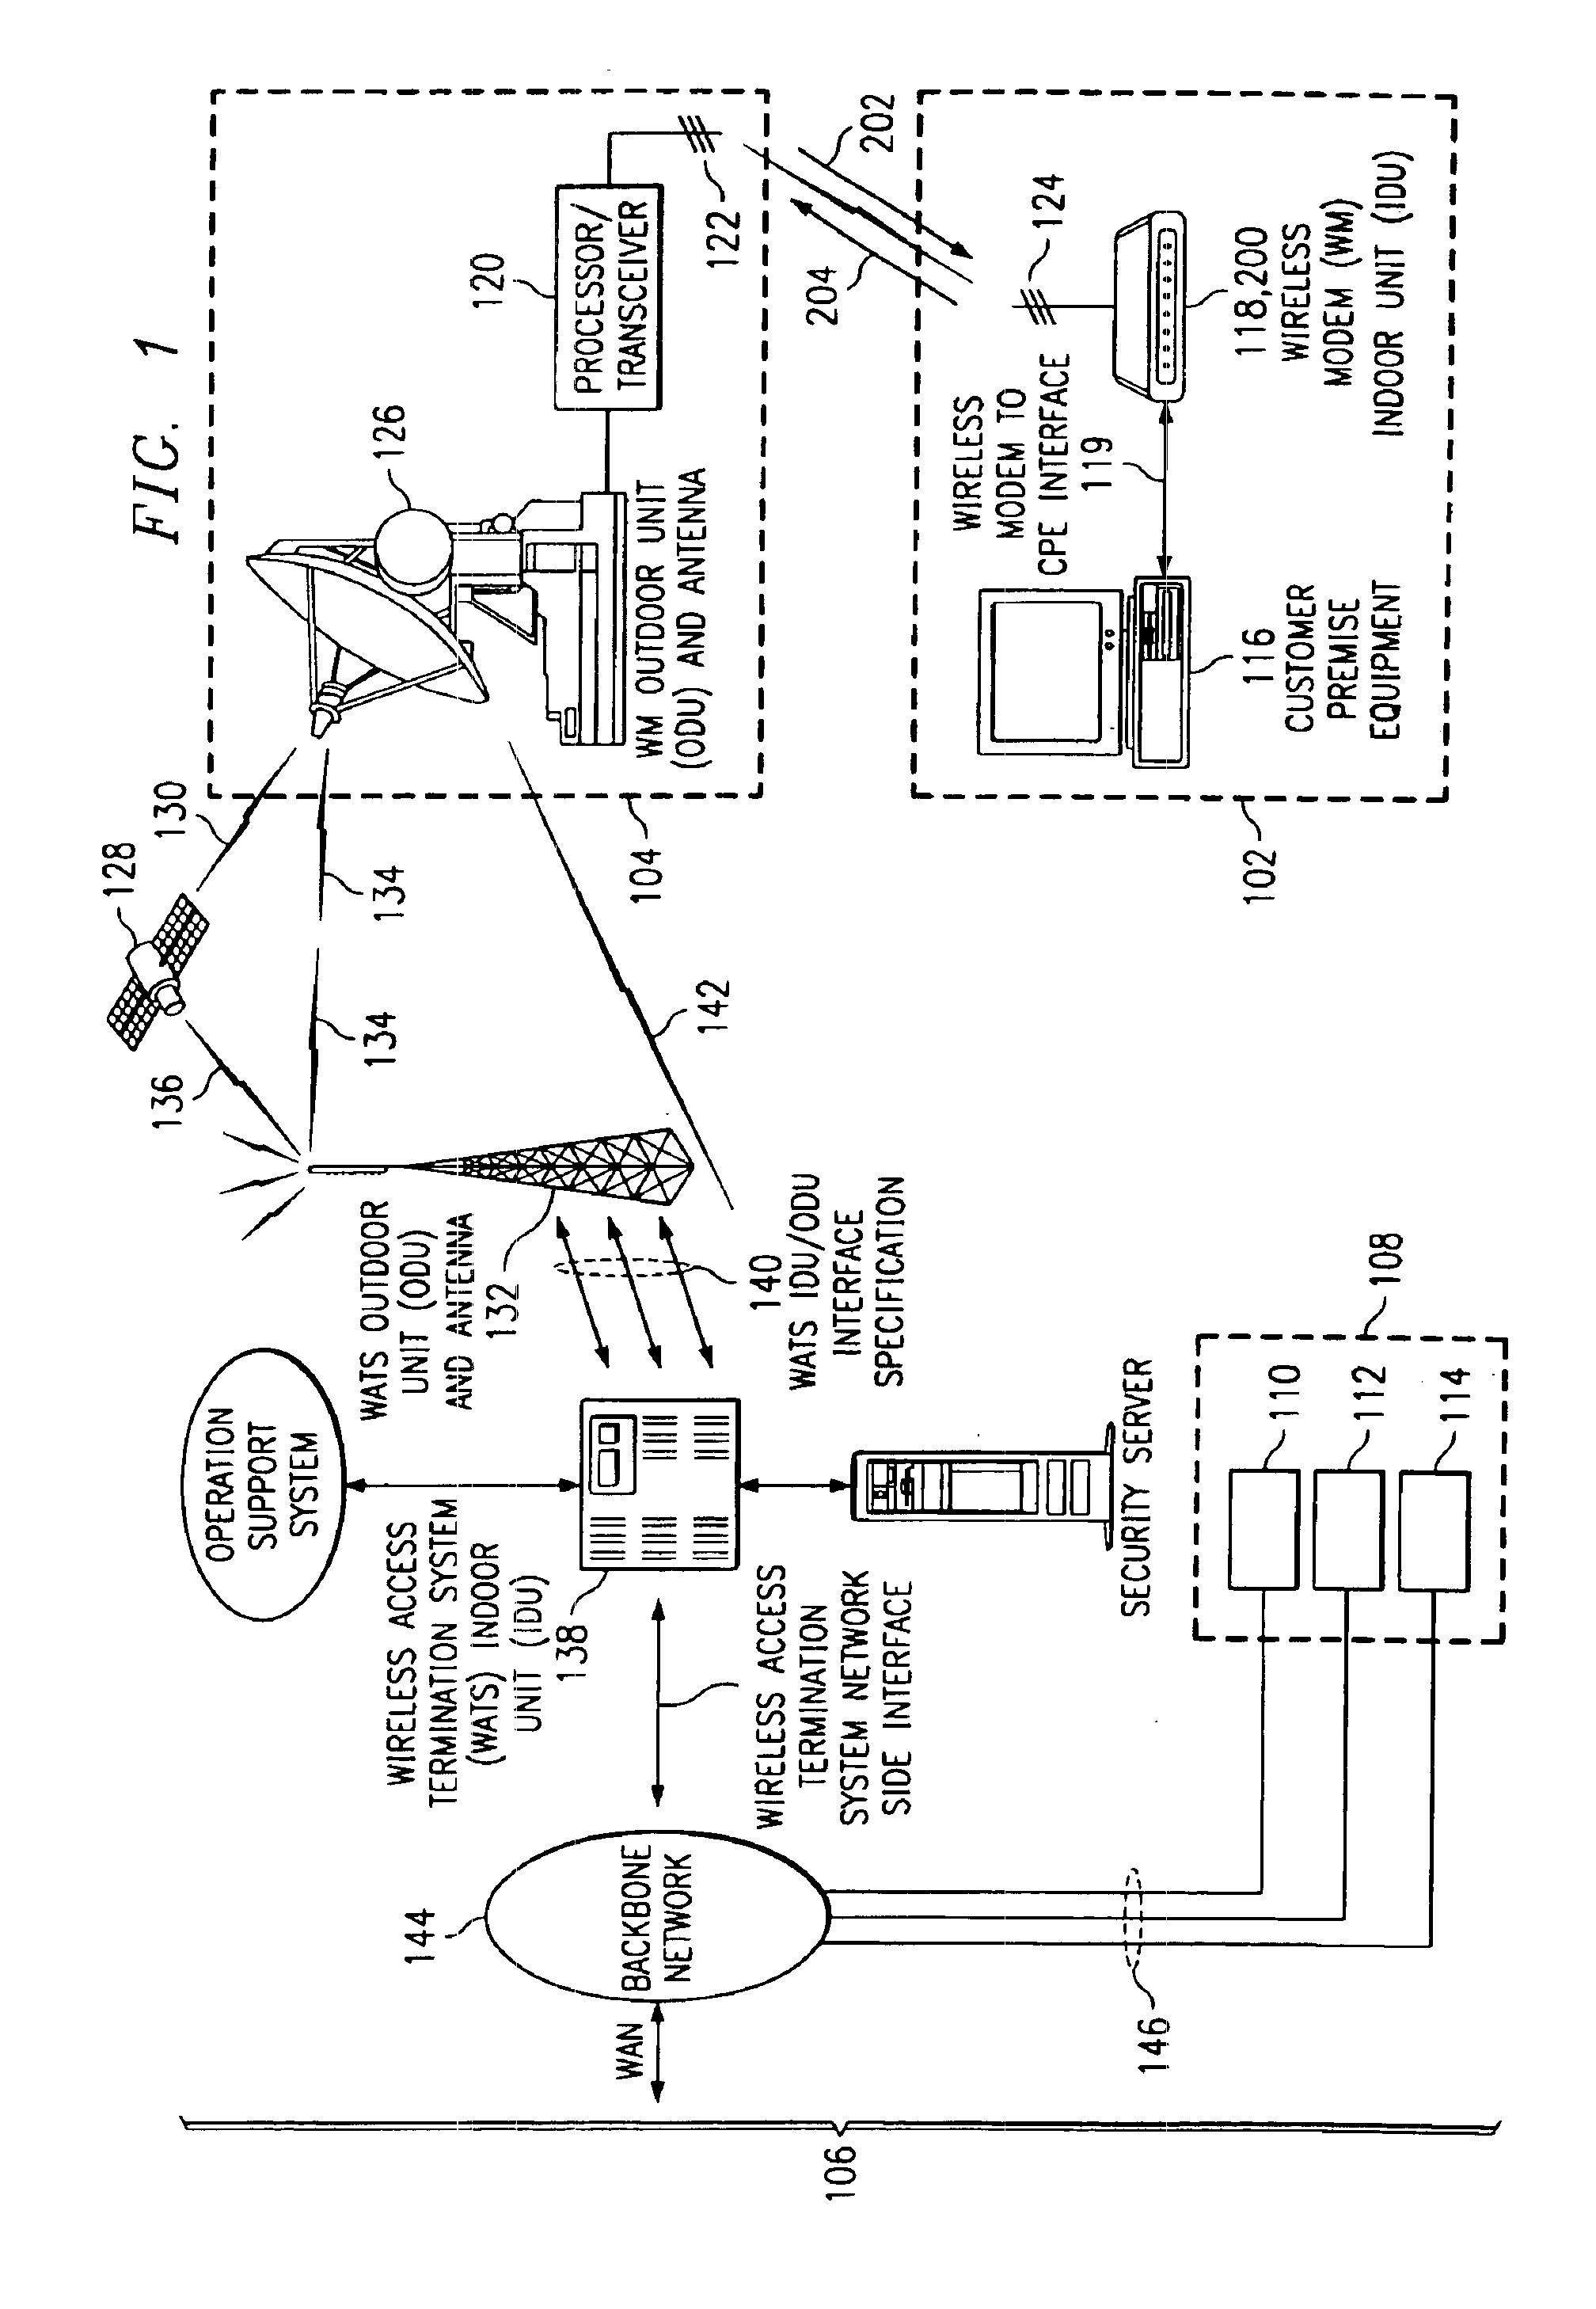 Method of and apparatus for implementing adaptive downstream modulation in a fixed wireless communication system